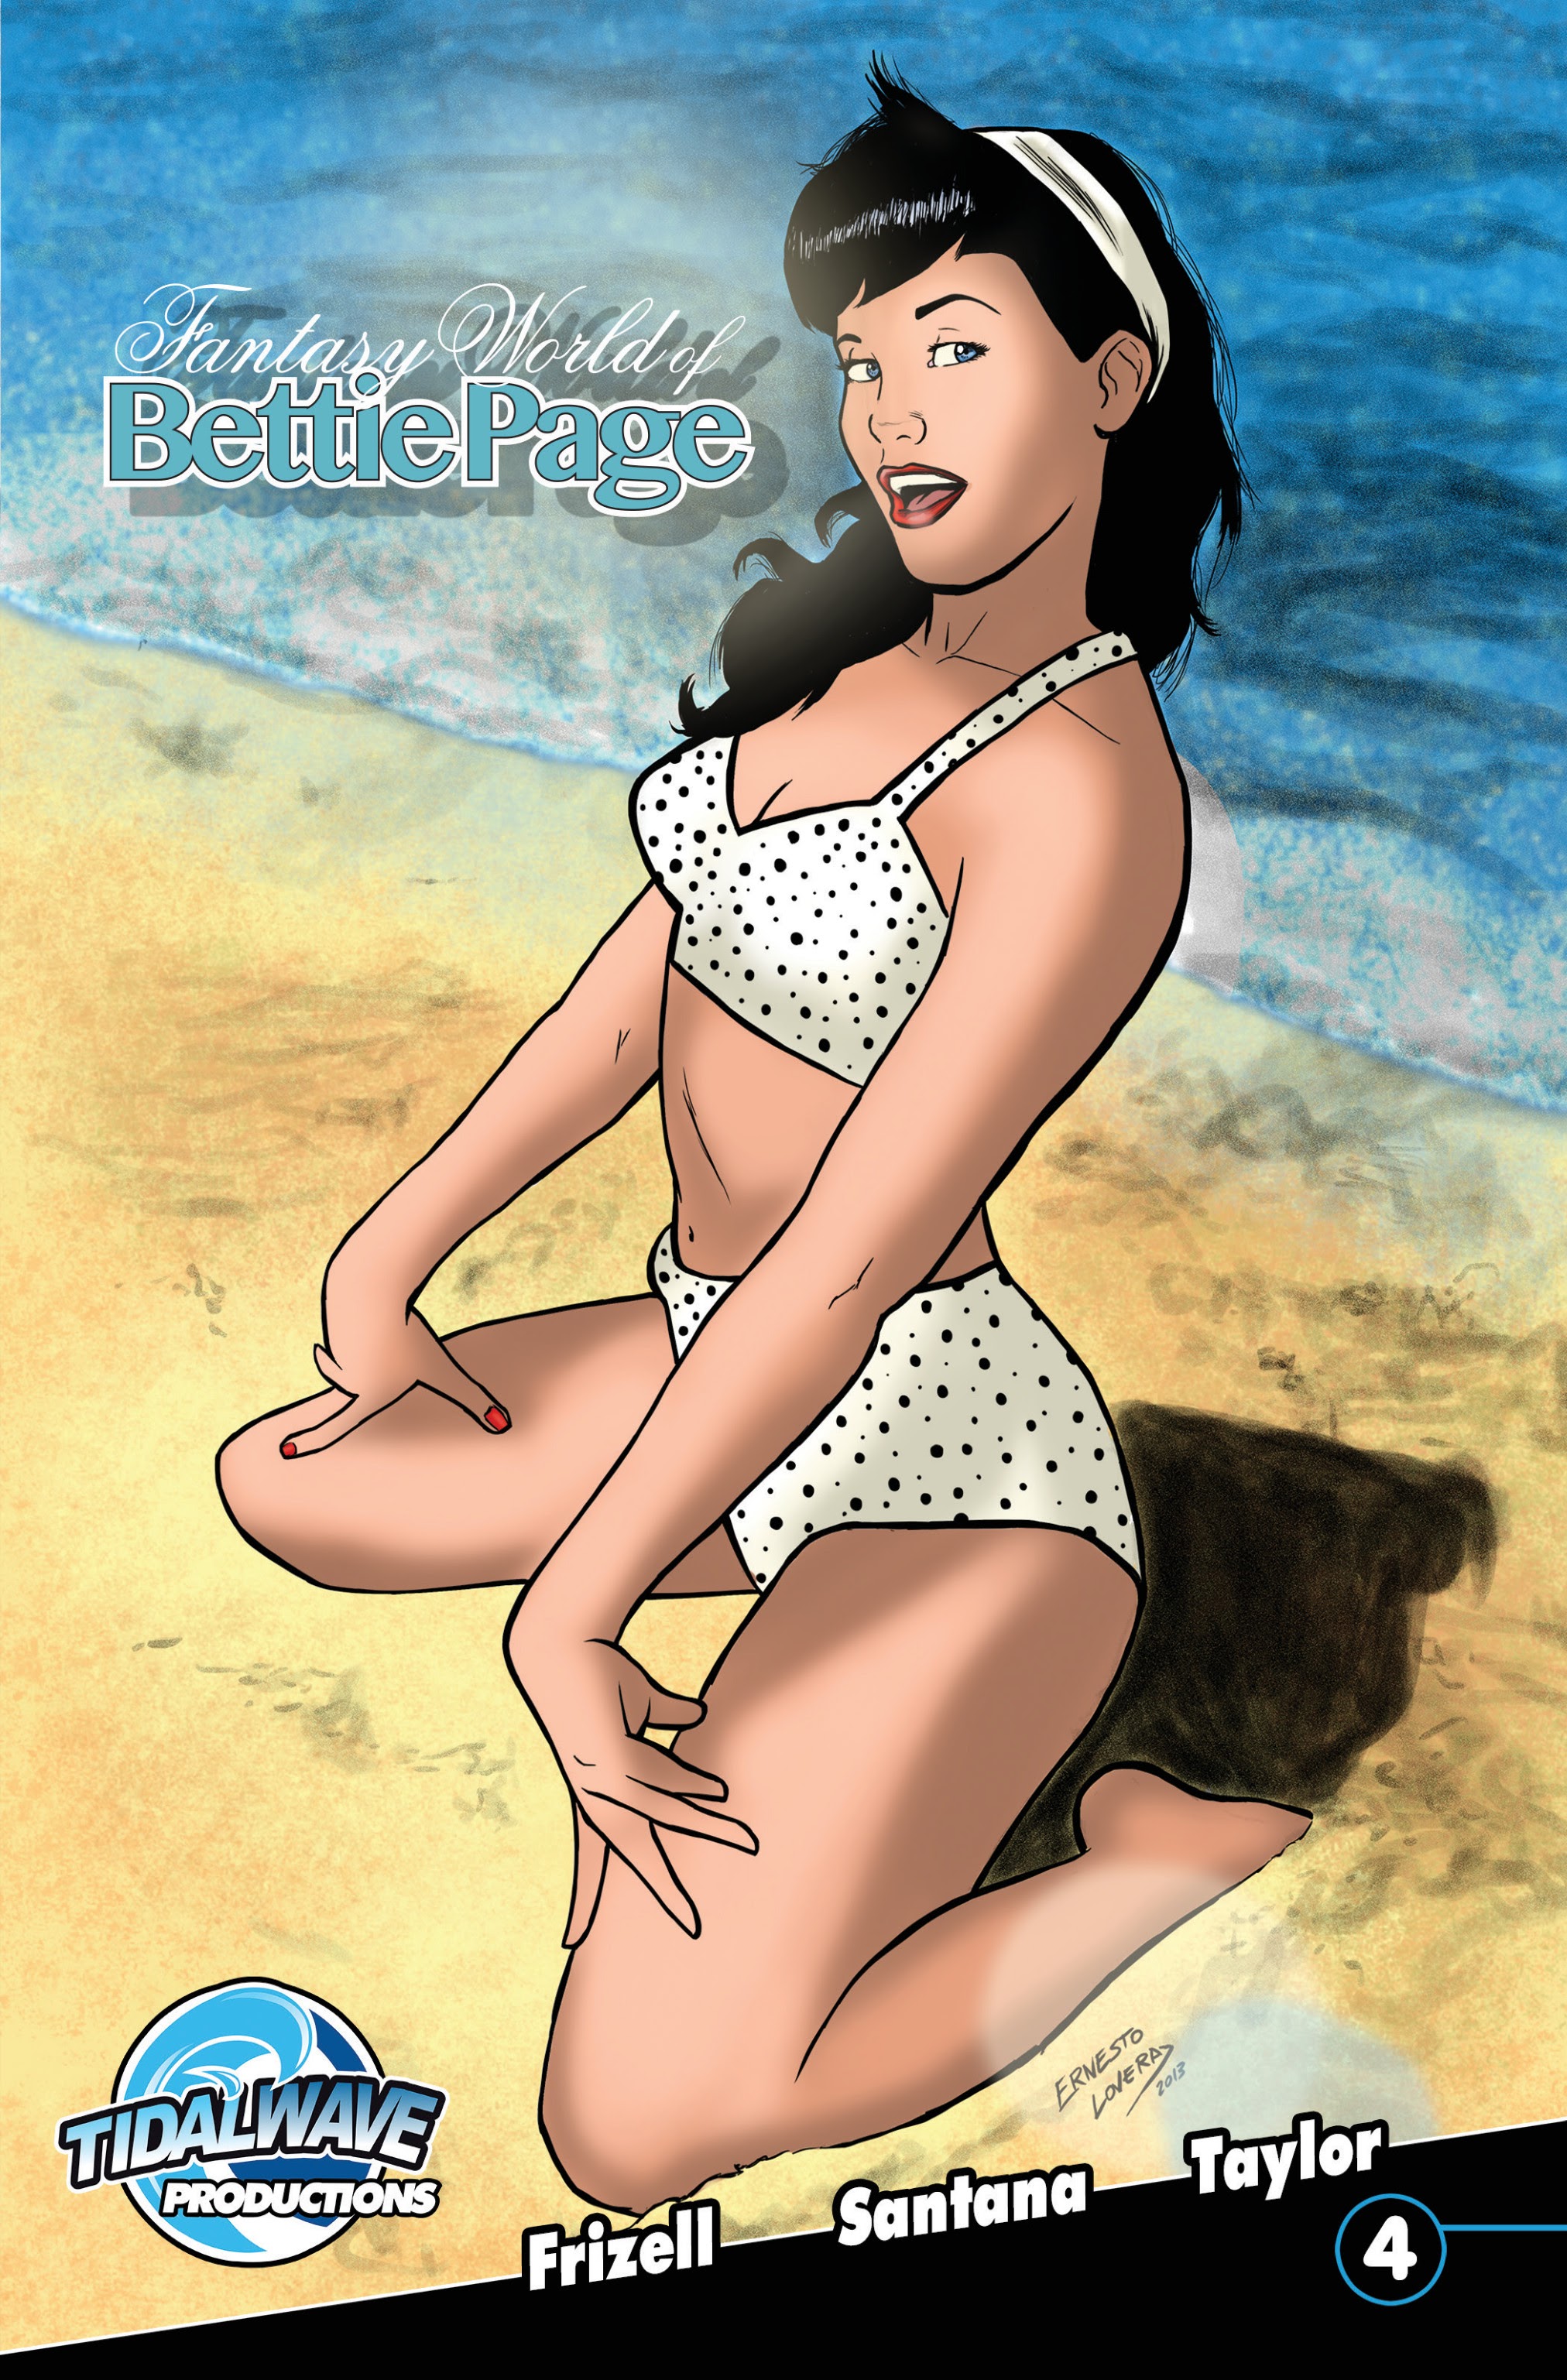 Read online Fantasy World of Bettie Page comic -  Issue #4 - 1